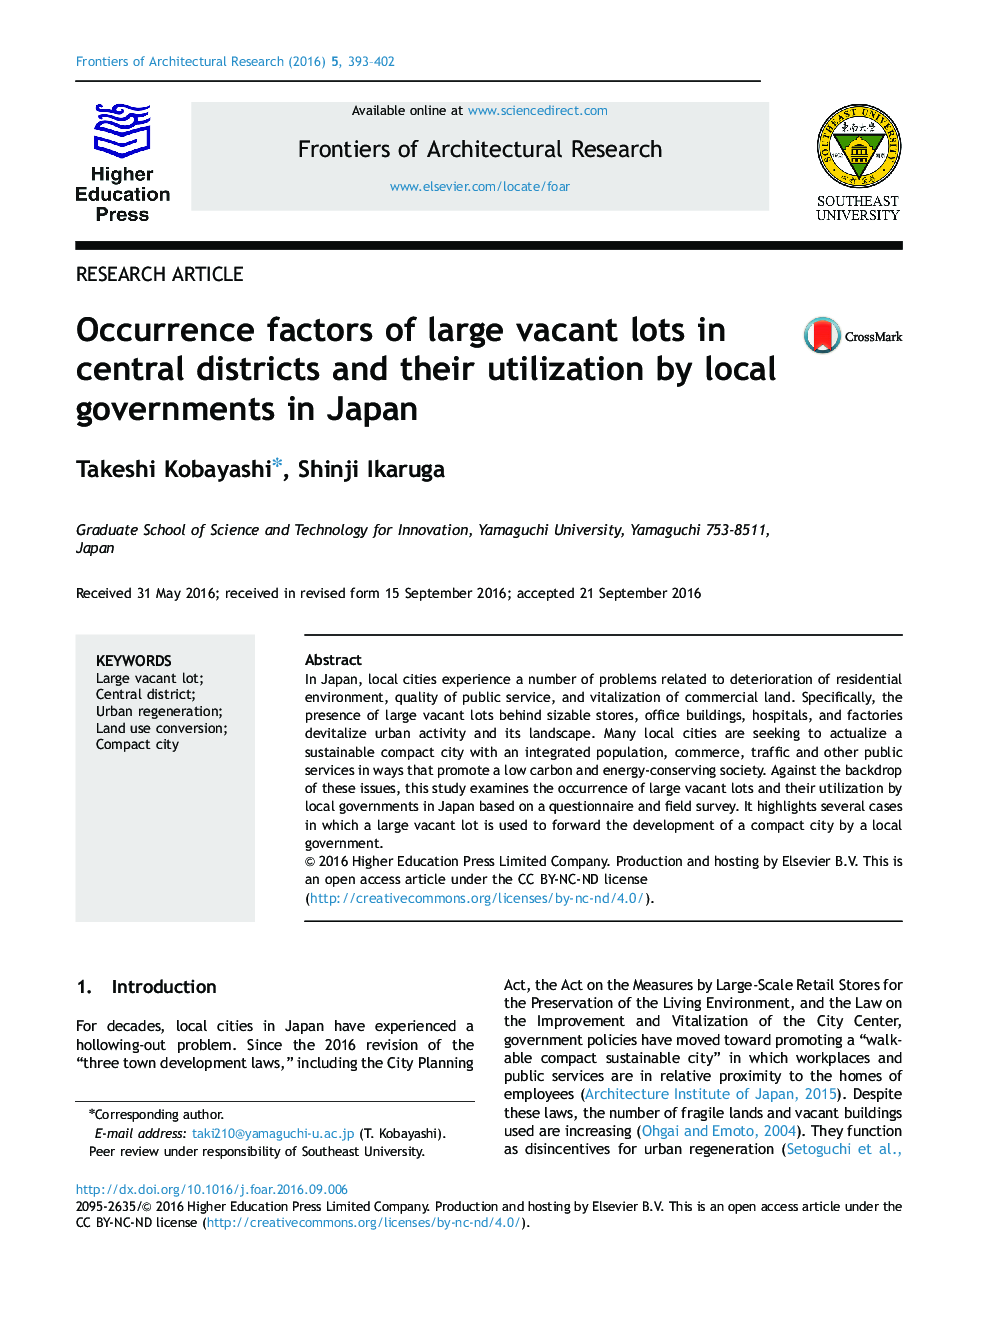 Occurrence factors of large vacant lots in central districts and their utilization by local governments in Japan